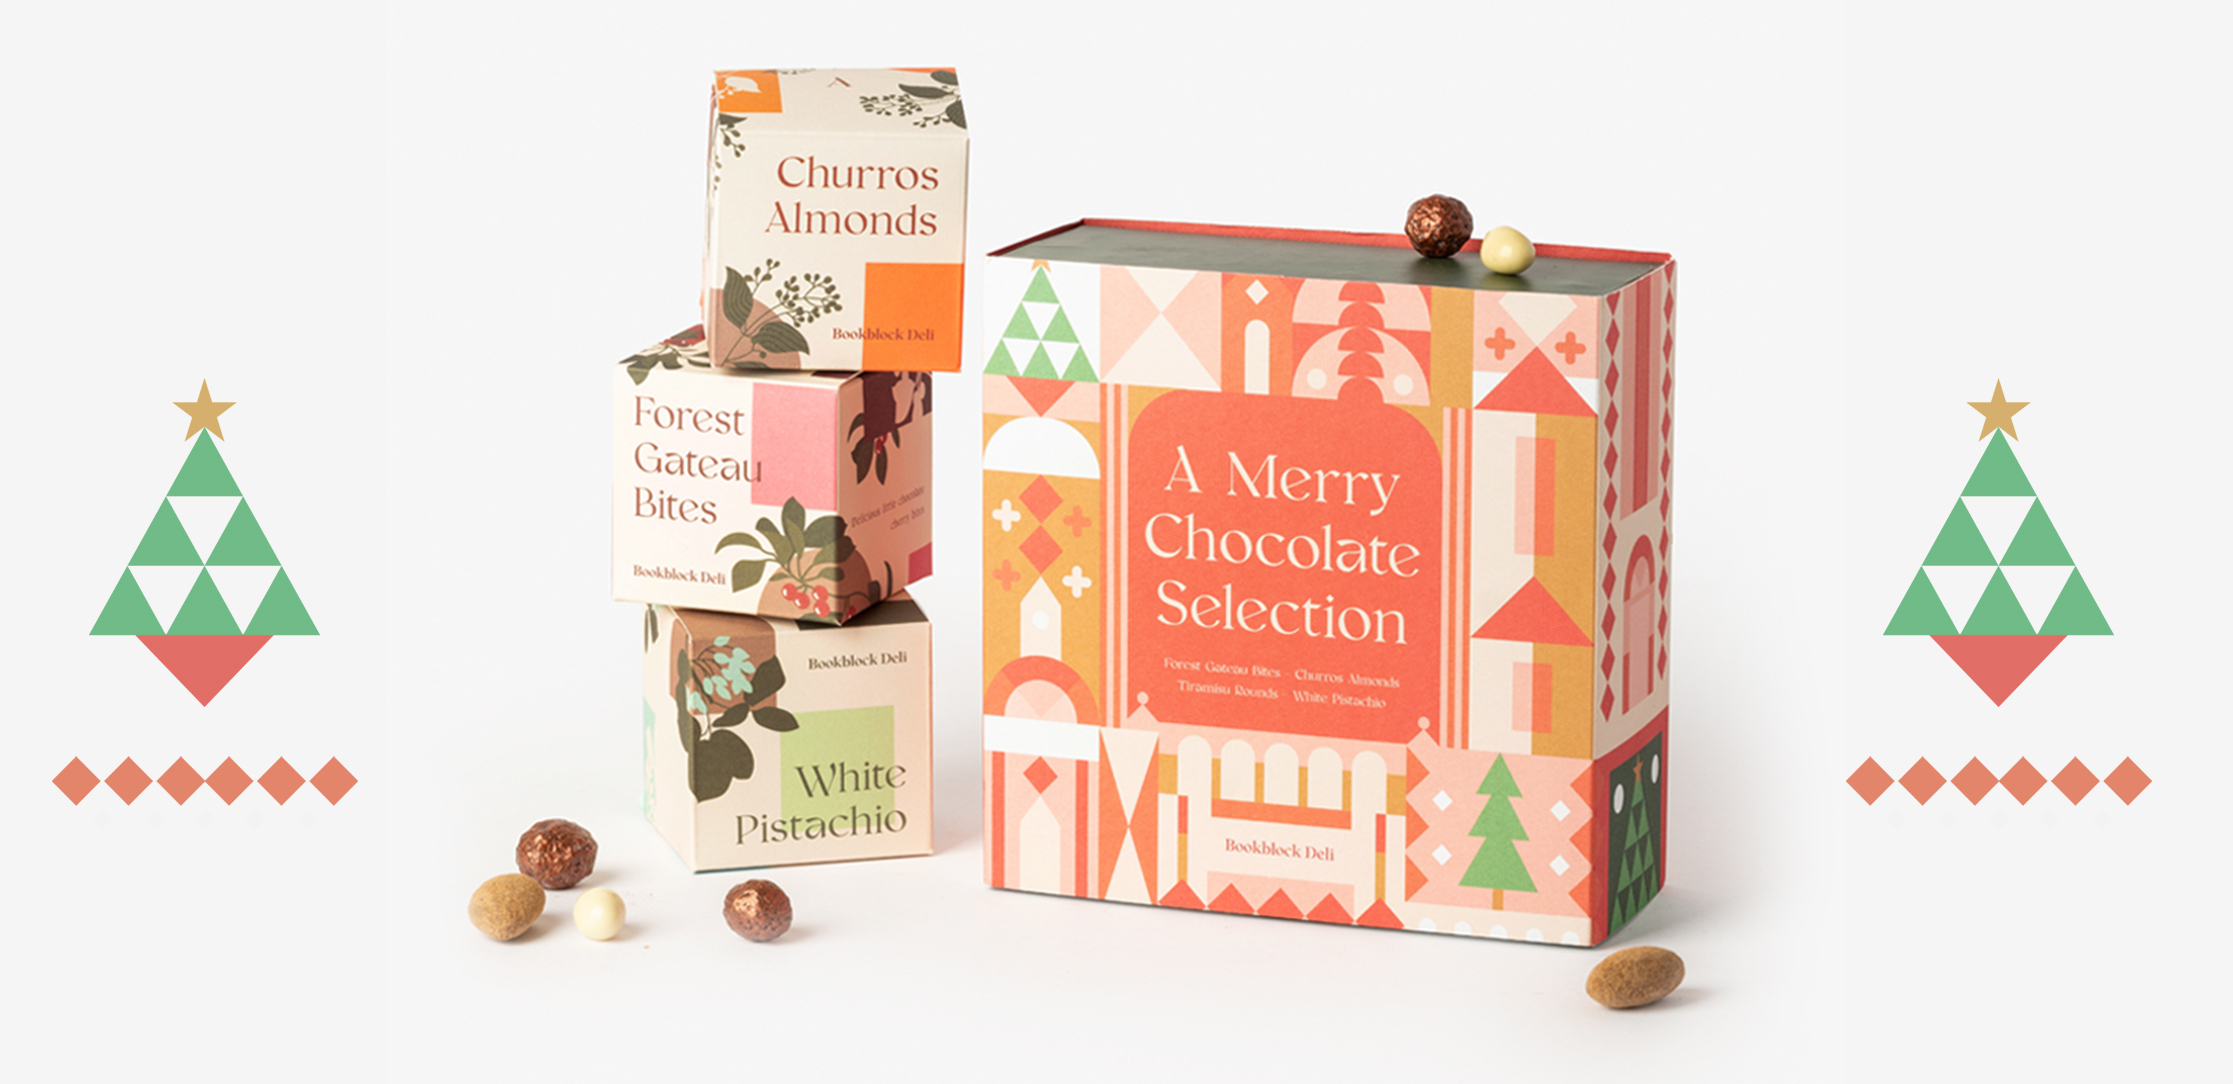 A Merry Chocolate Selection with abstract christmas tree detail in green and orange